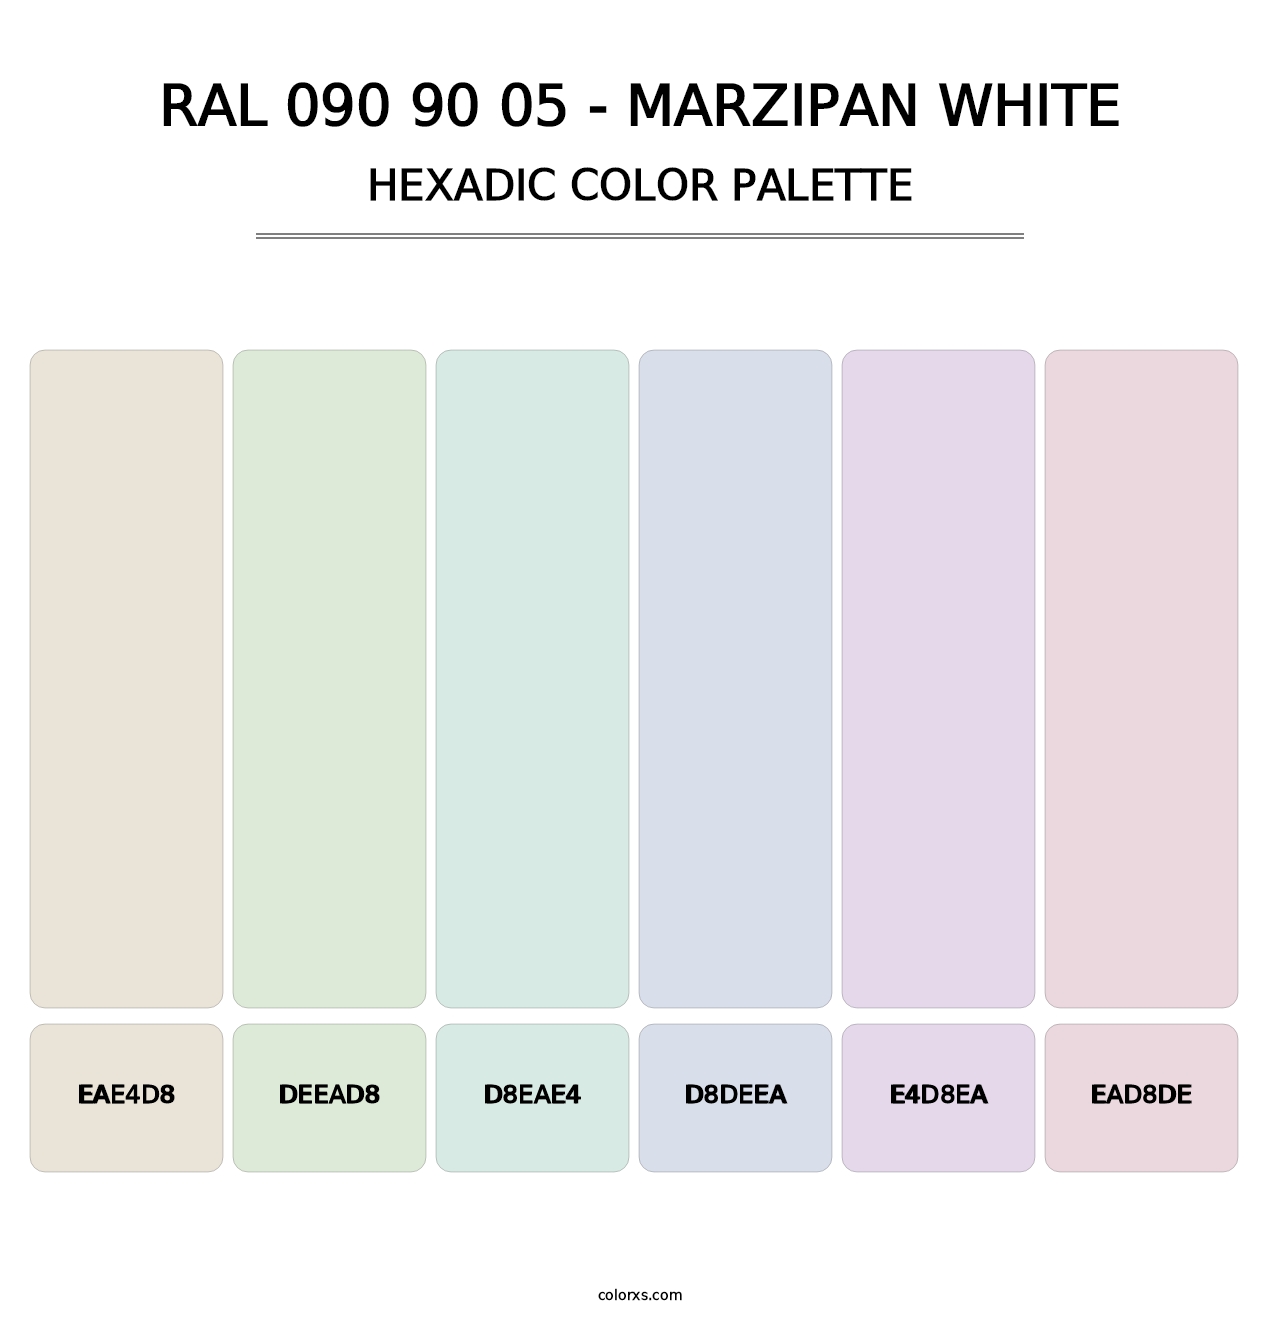 RAL 090 90 05 - Marzipan White - Hexadic Color Palette